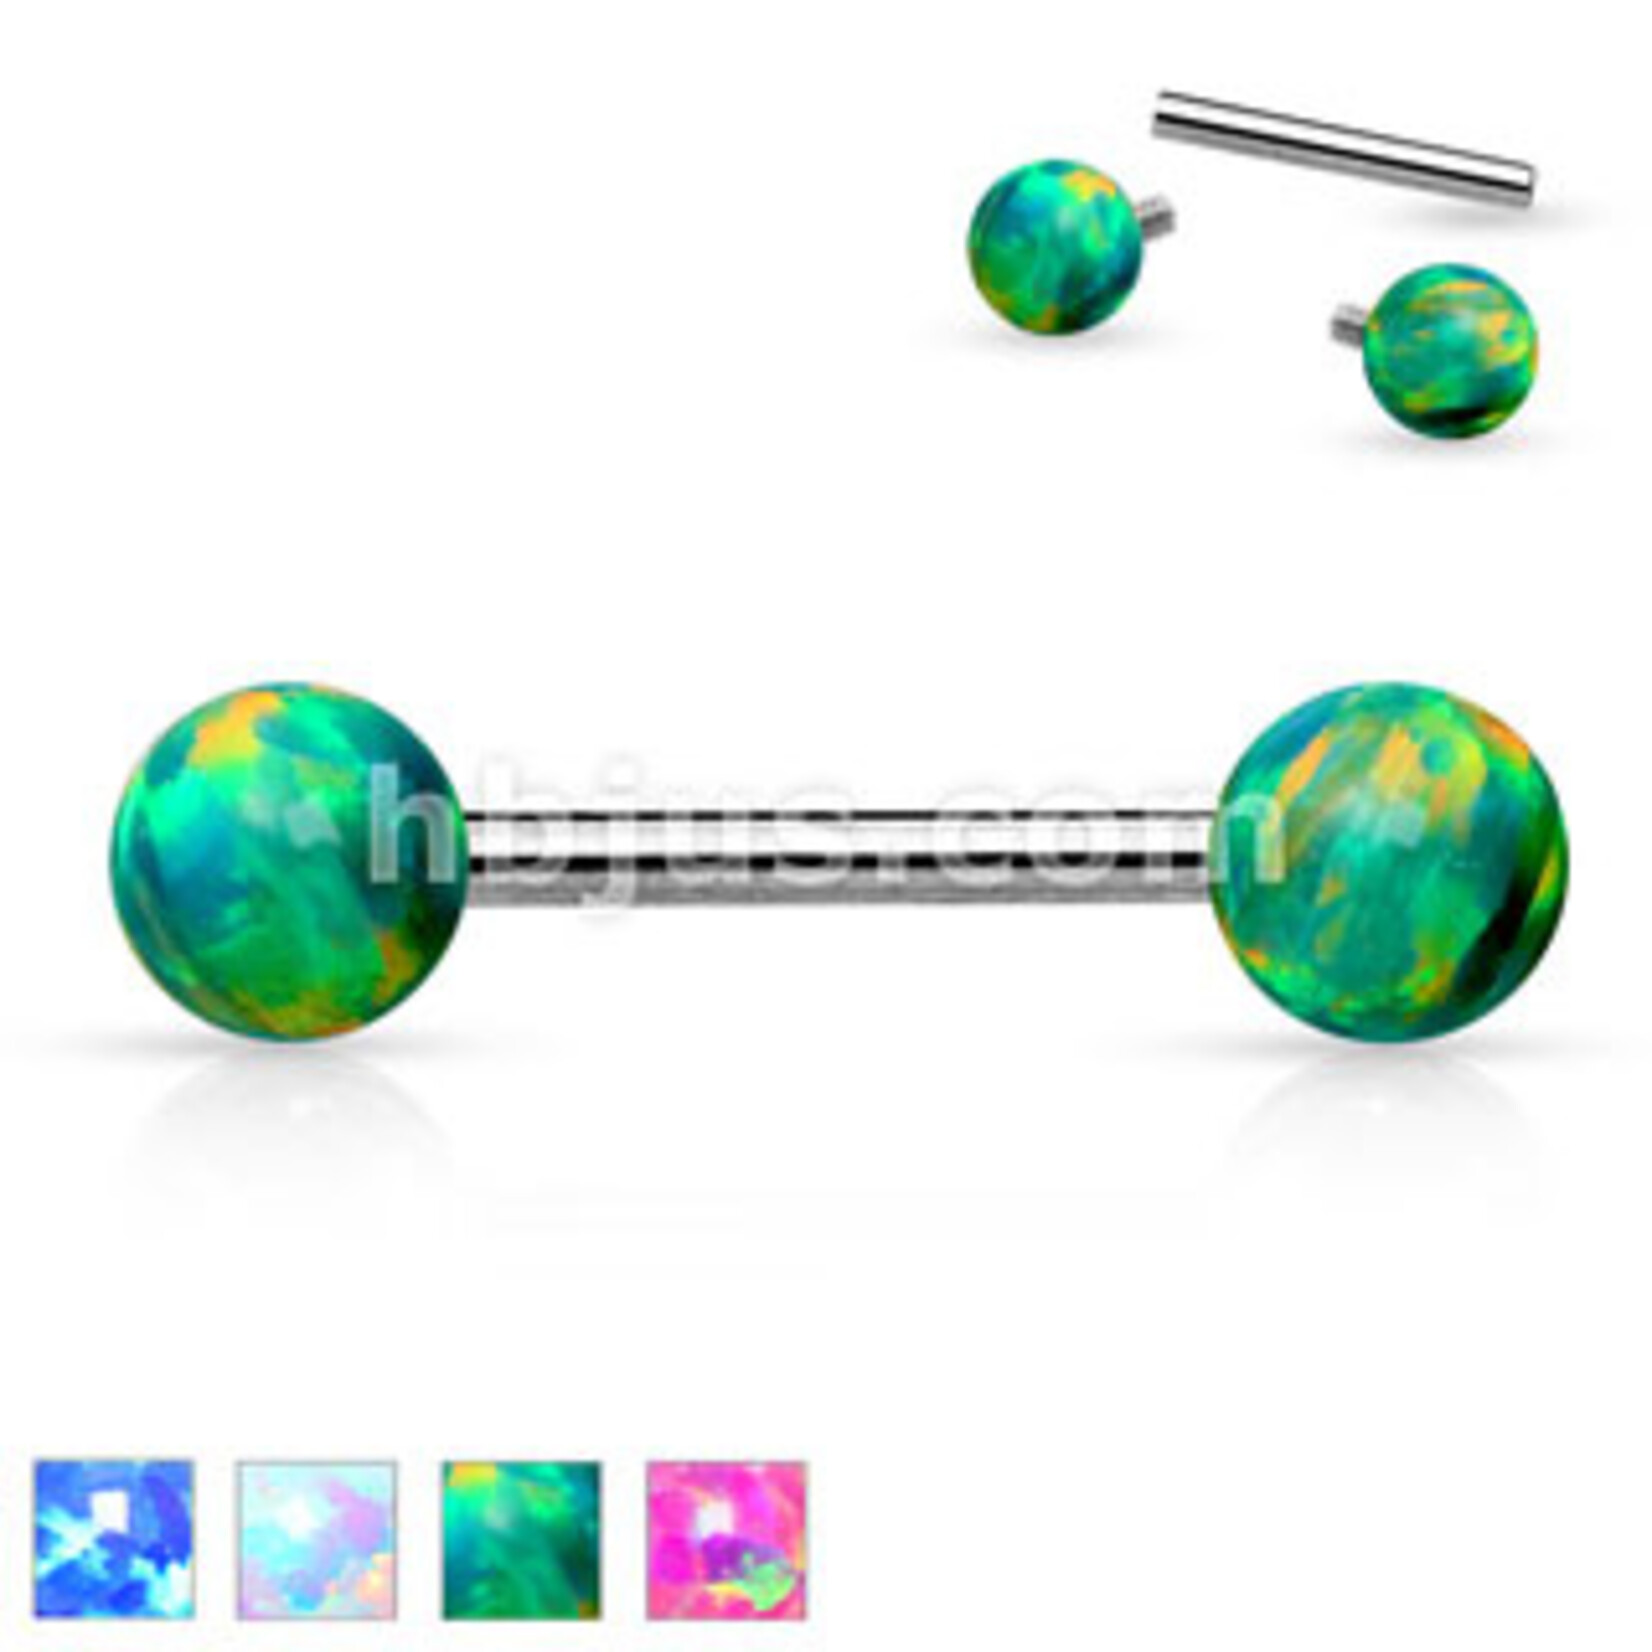 Hollywood Body Jewelry Opal Balls Both Sides Barbell